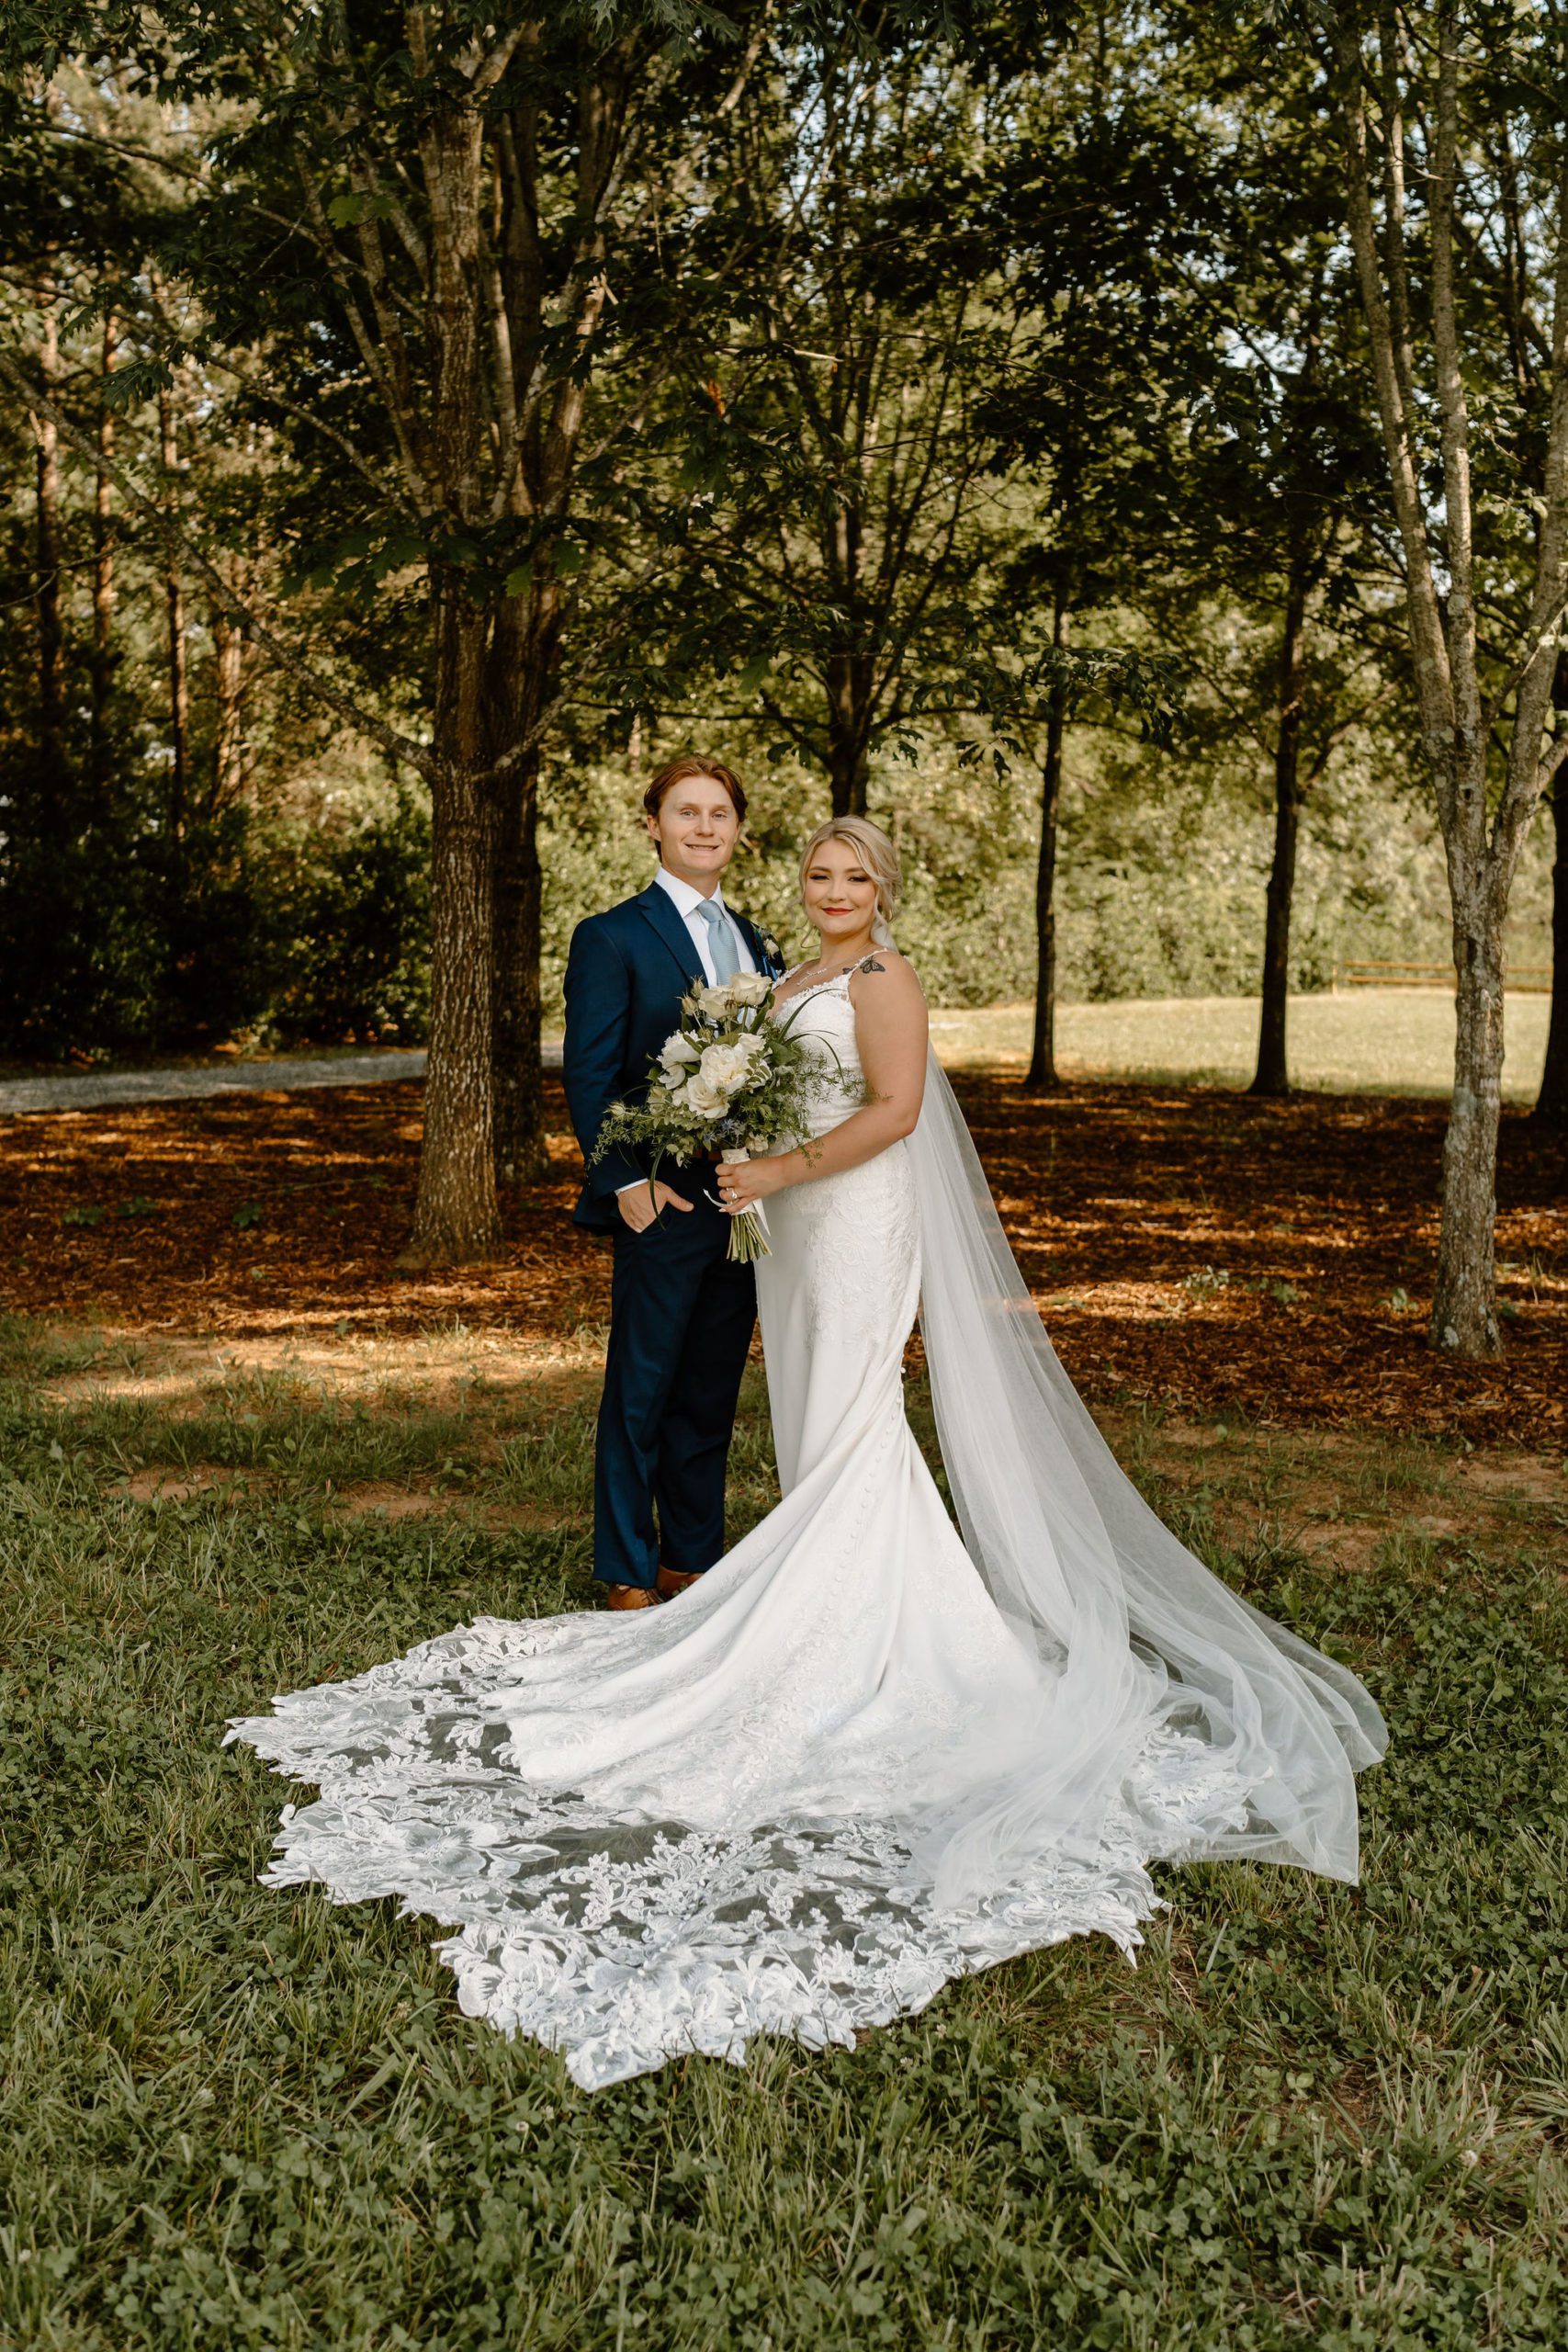 Bride and groom with white flowers, elegant wedding decor and beautiful lace wedding dress in North Carolina
